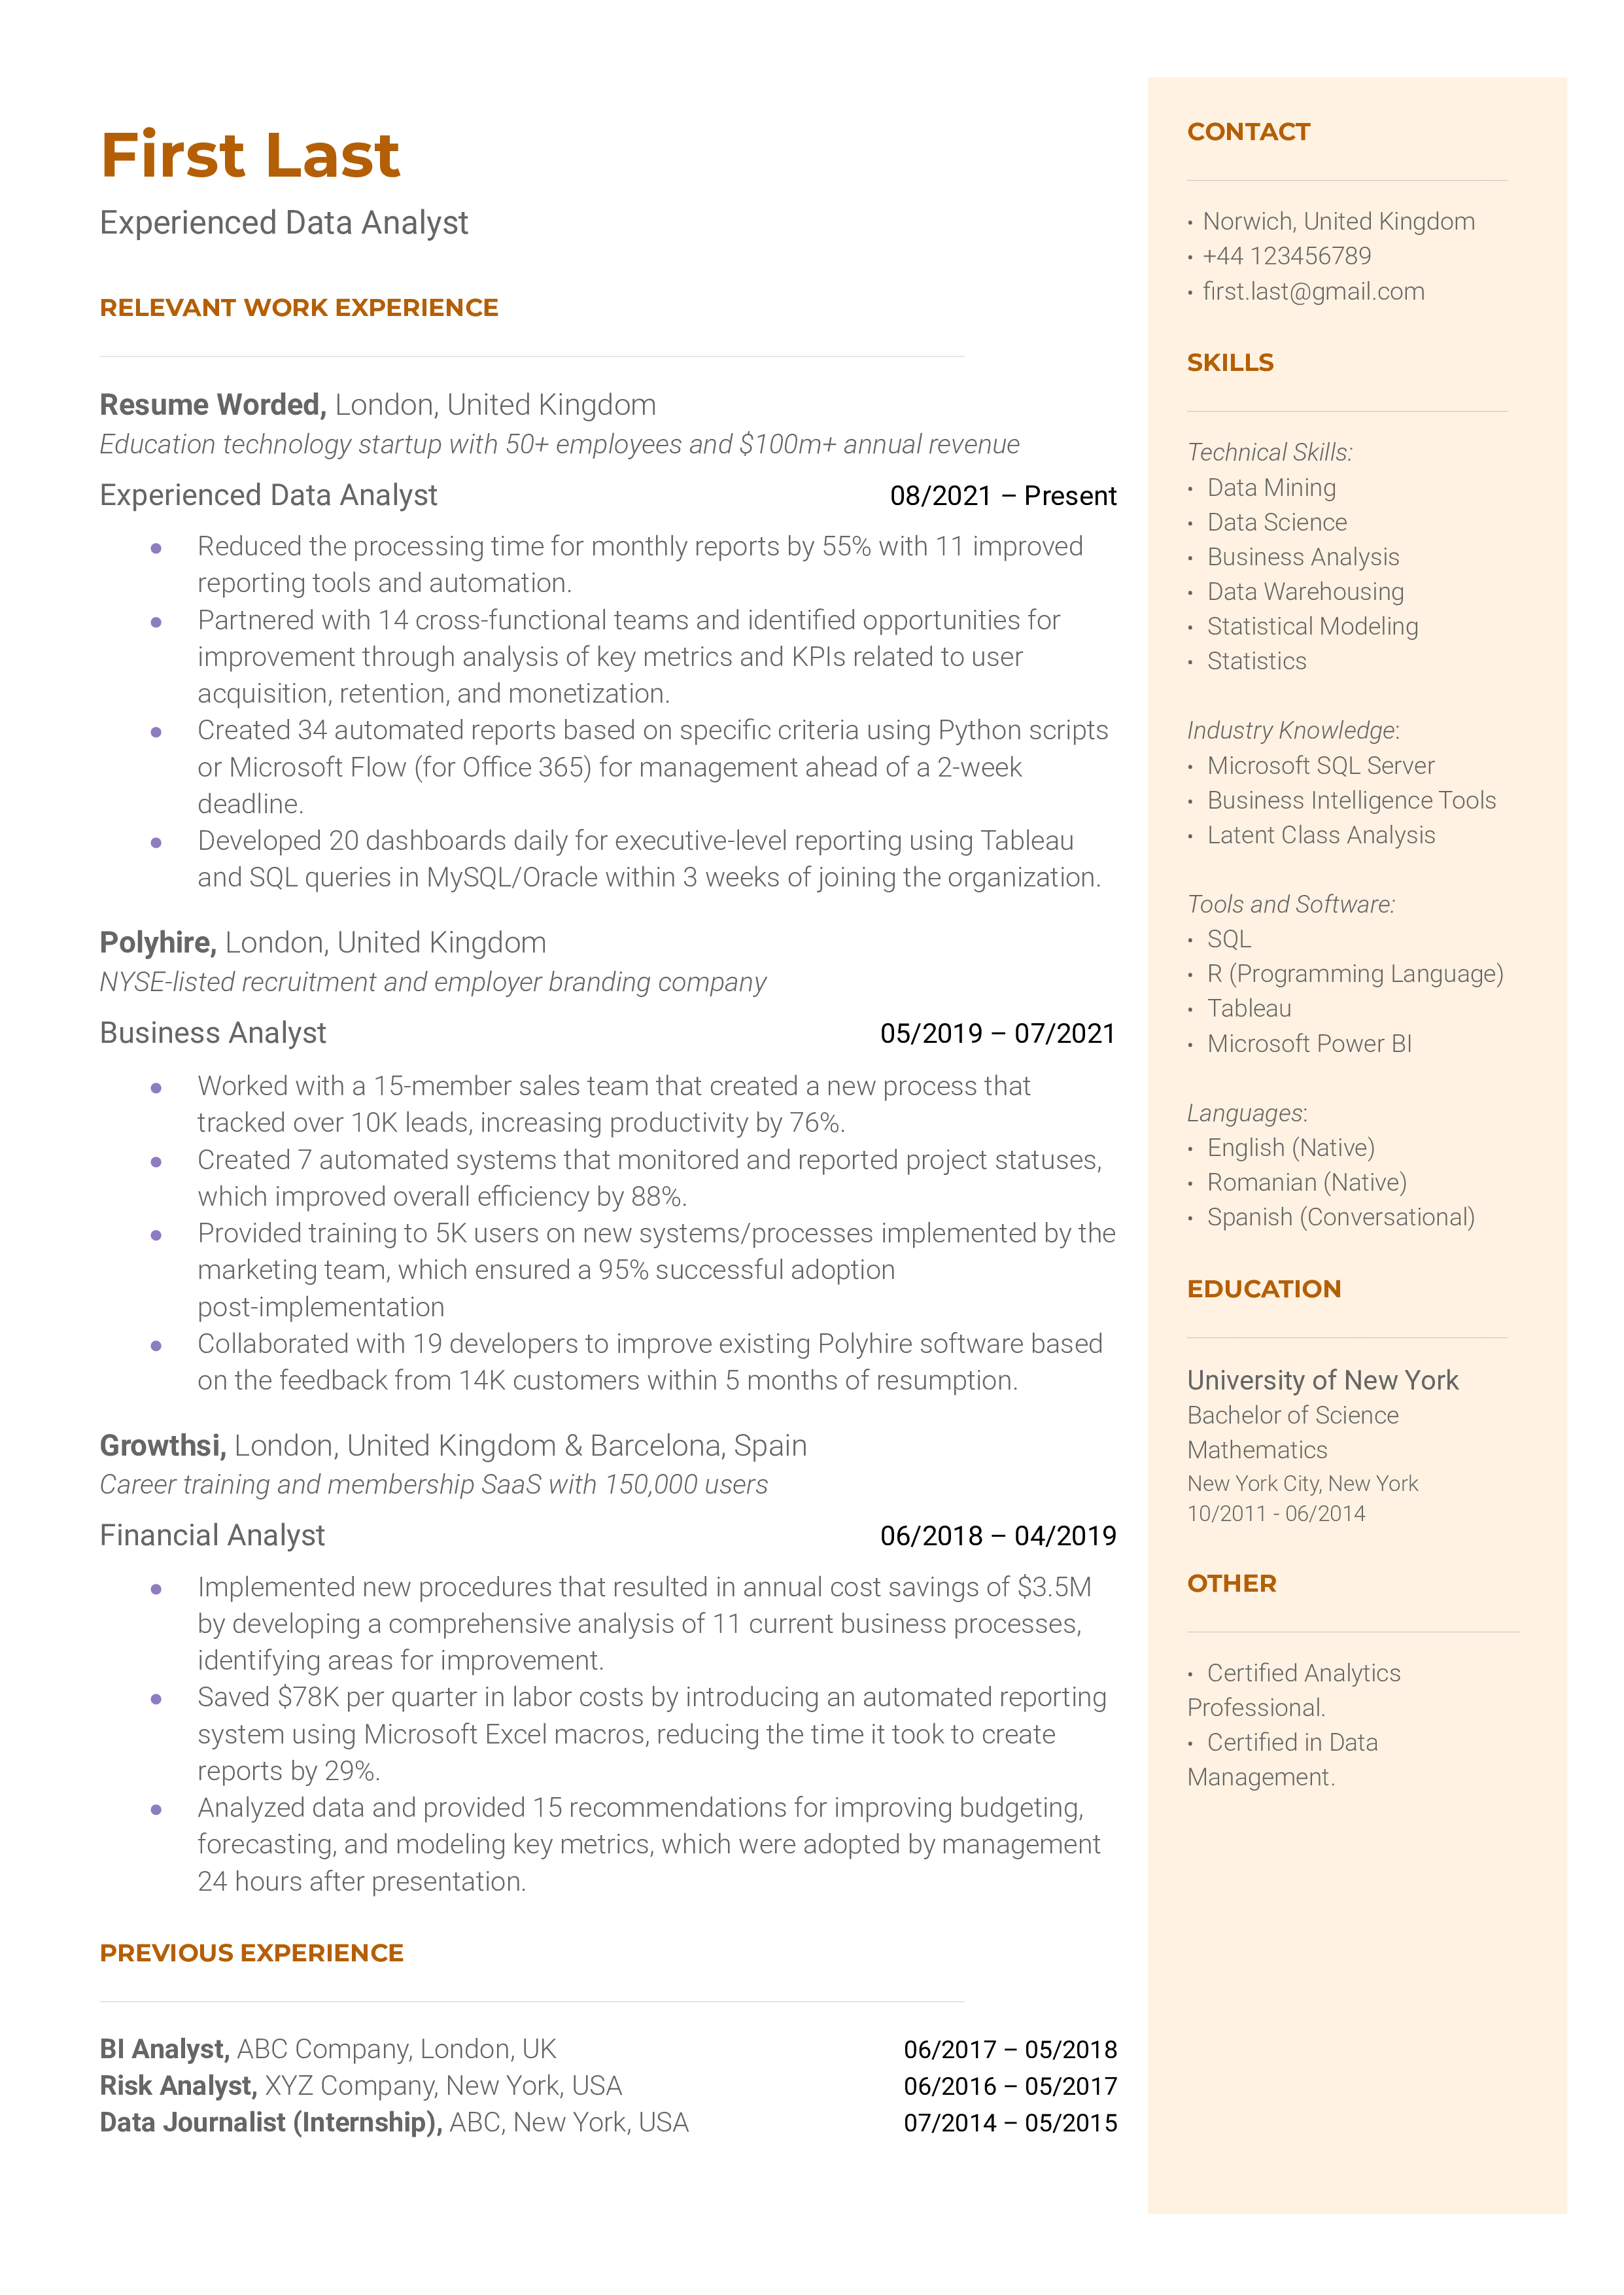 Experienced data analyst resume sample that highlights the applicant's experience and certifications.